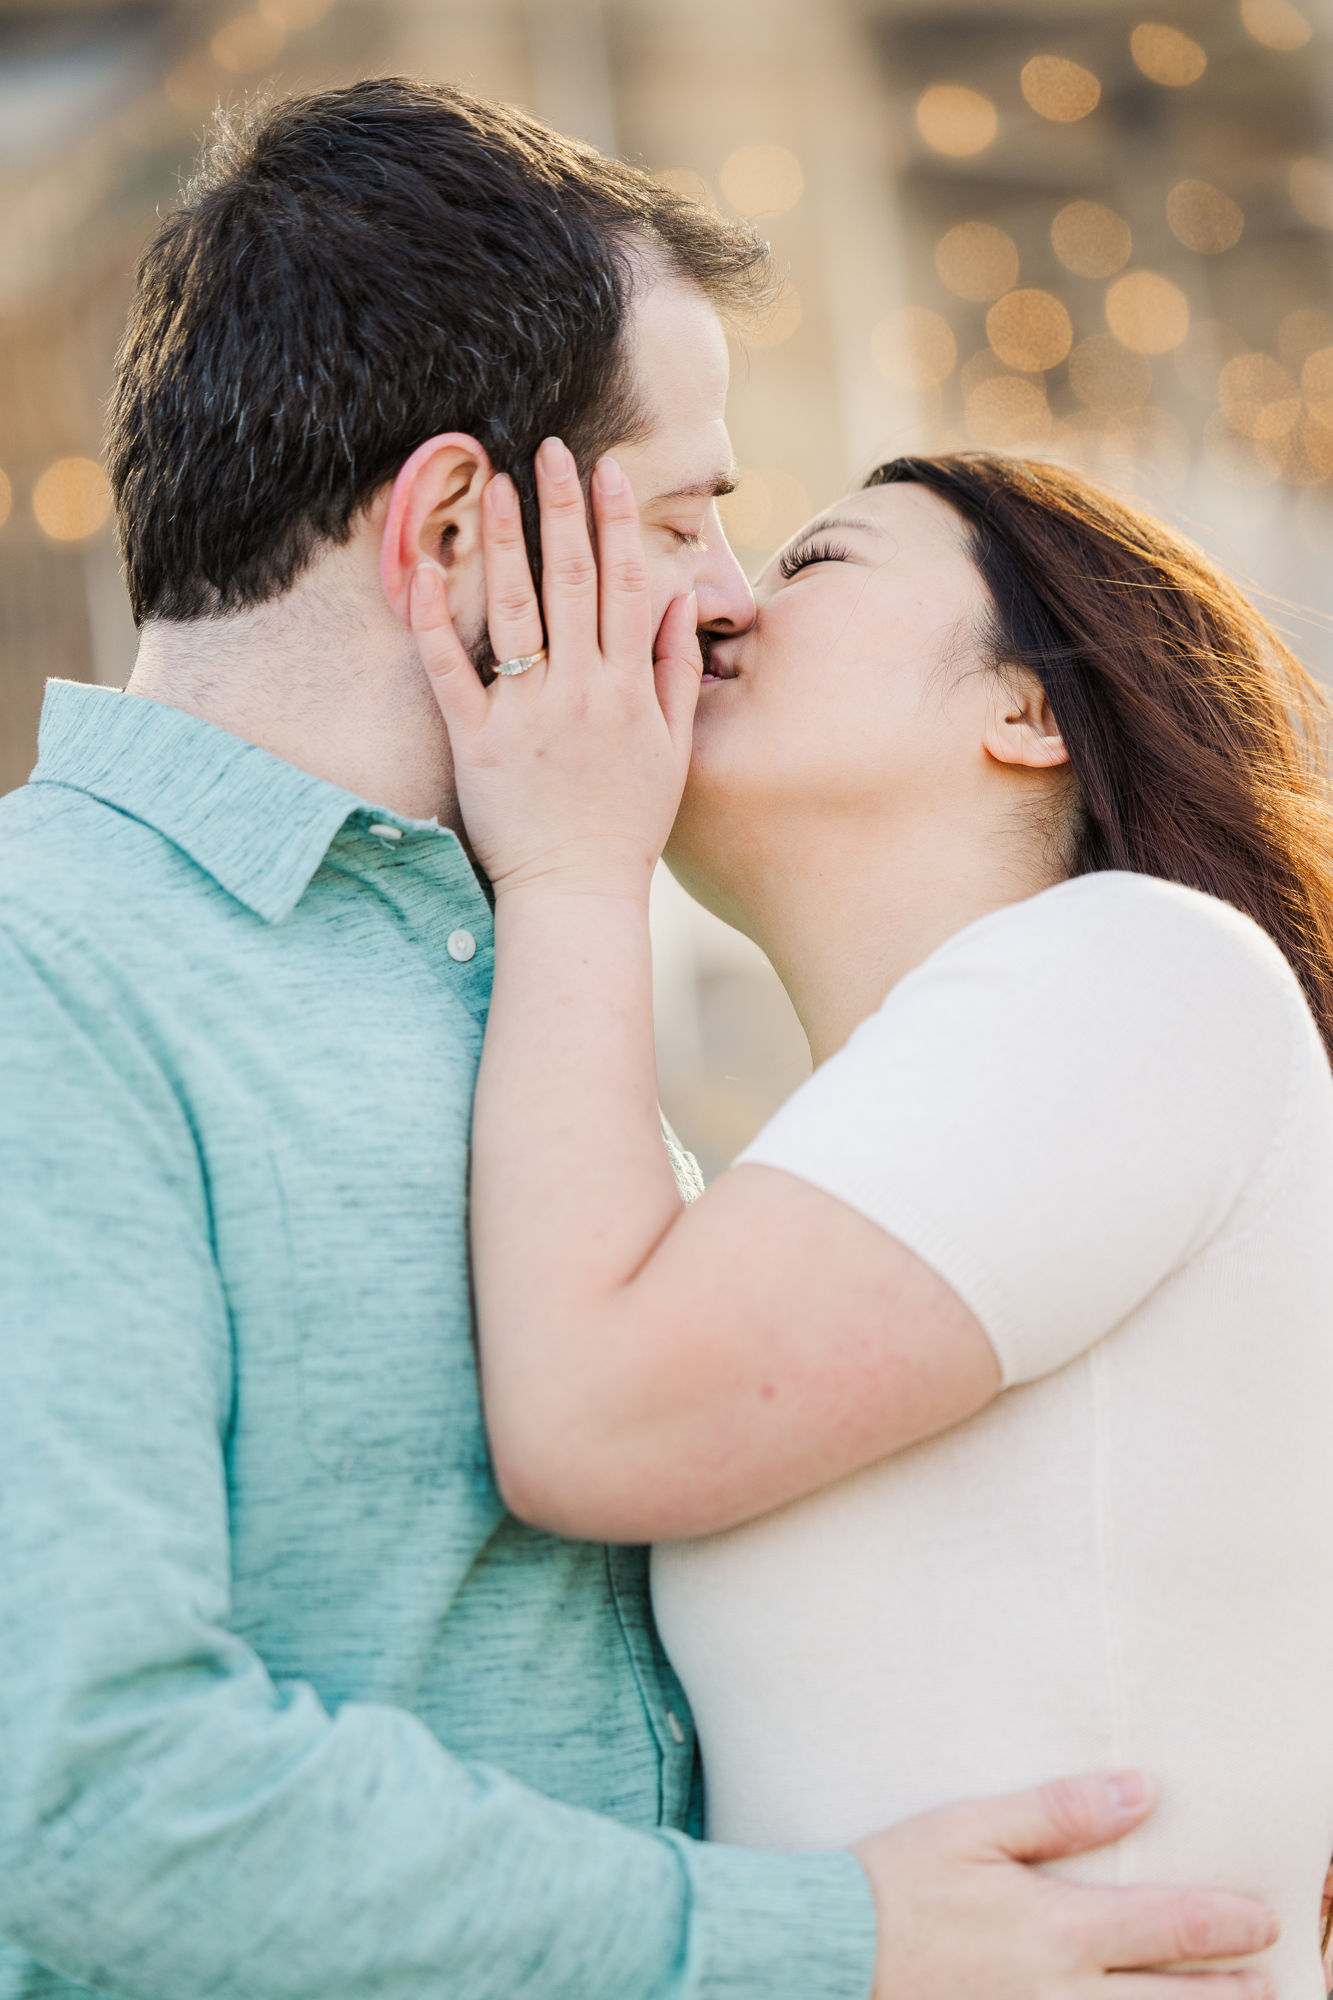 Intimate Brooklyn Bridge Engagement Photography with Matching Outfits